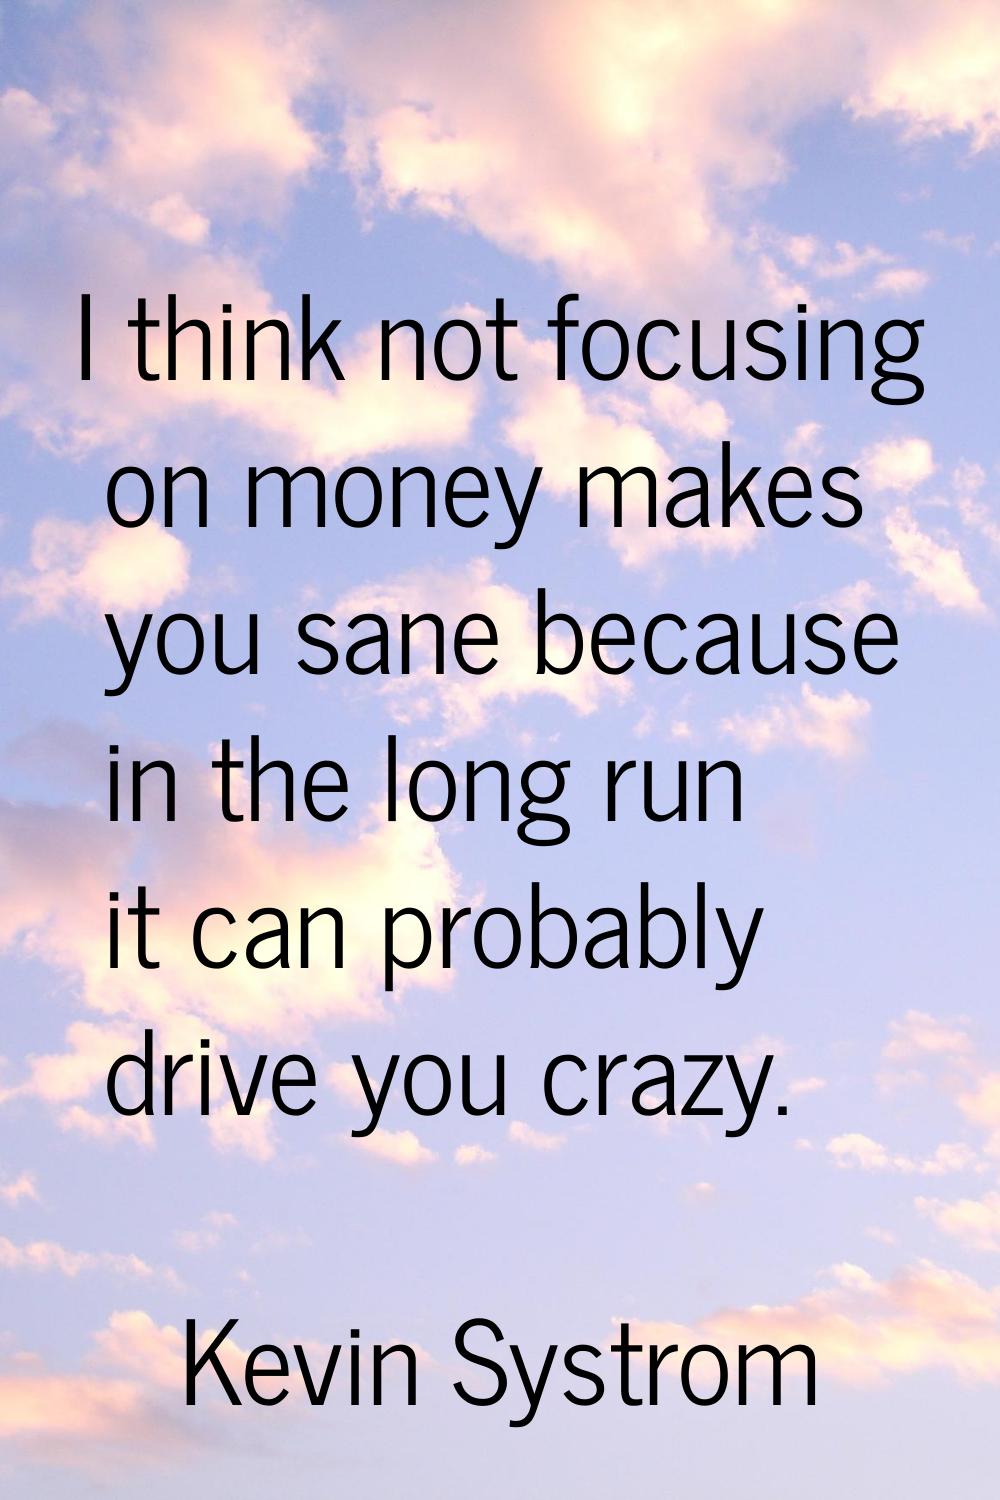 I think not focusing on money makes you sane because in the long run it can probably drive you craz